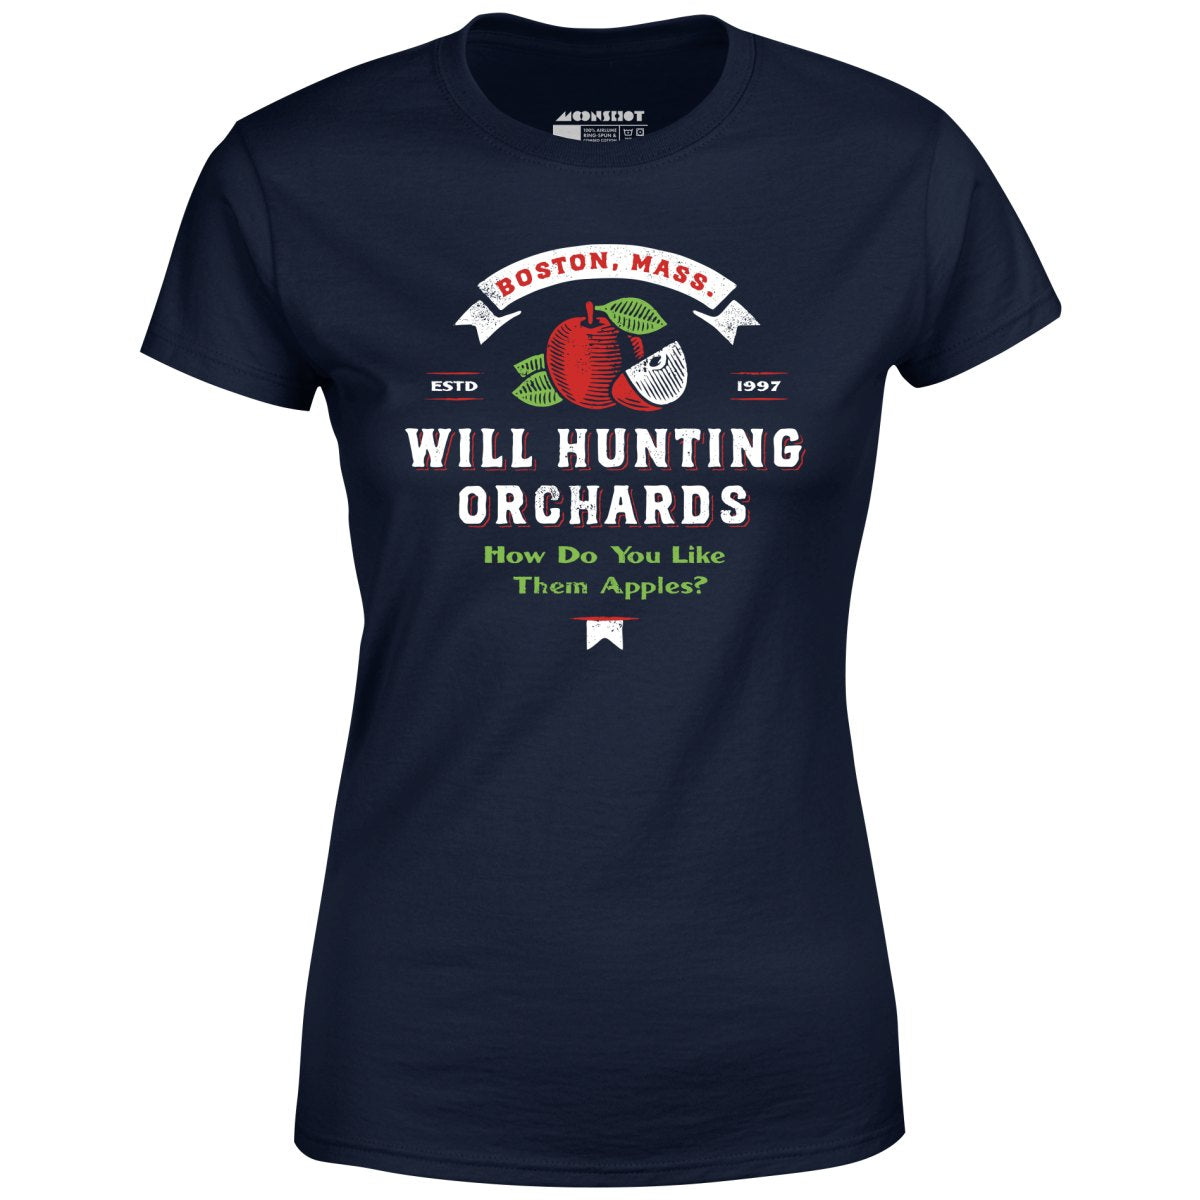 Will Hunting Orchards - Women's T-Shirt